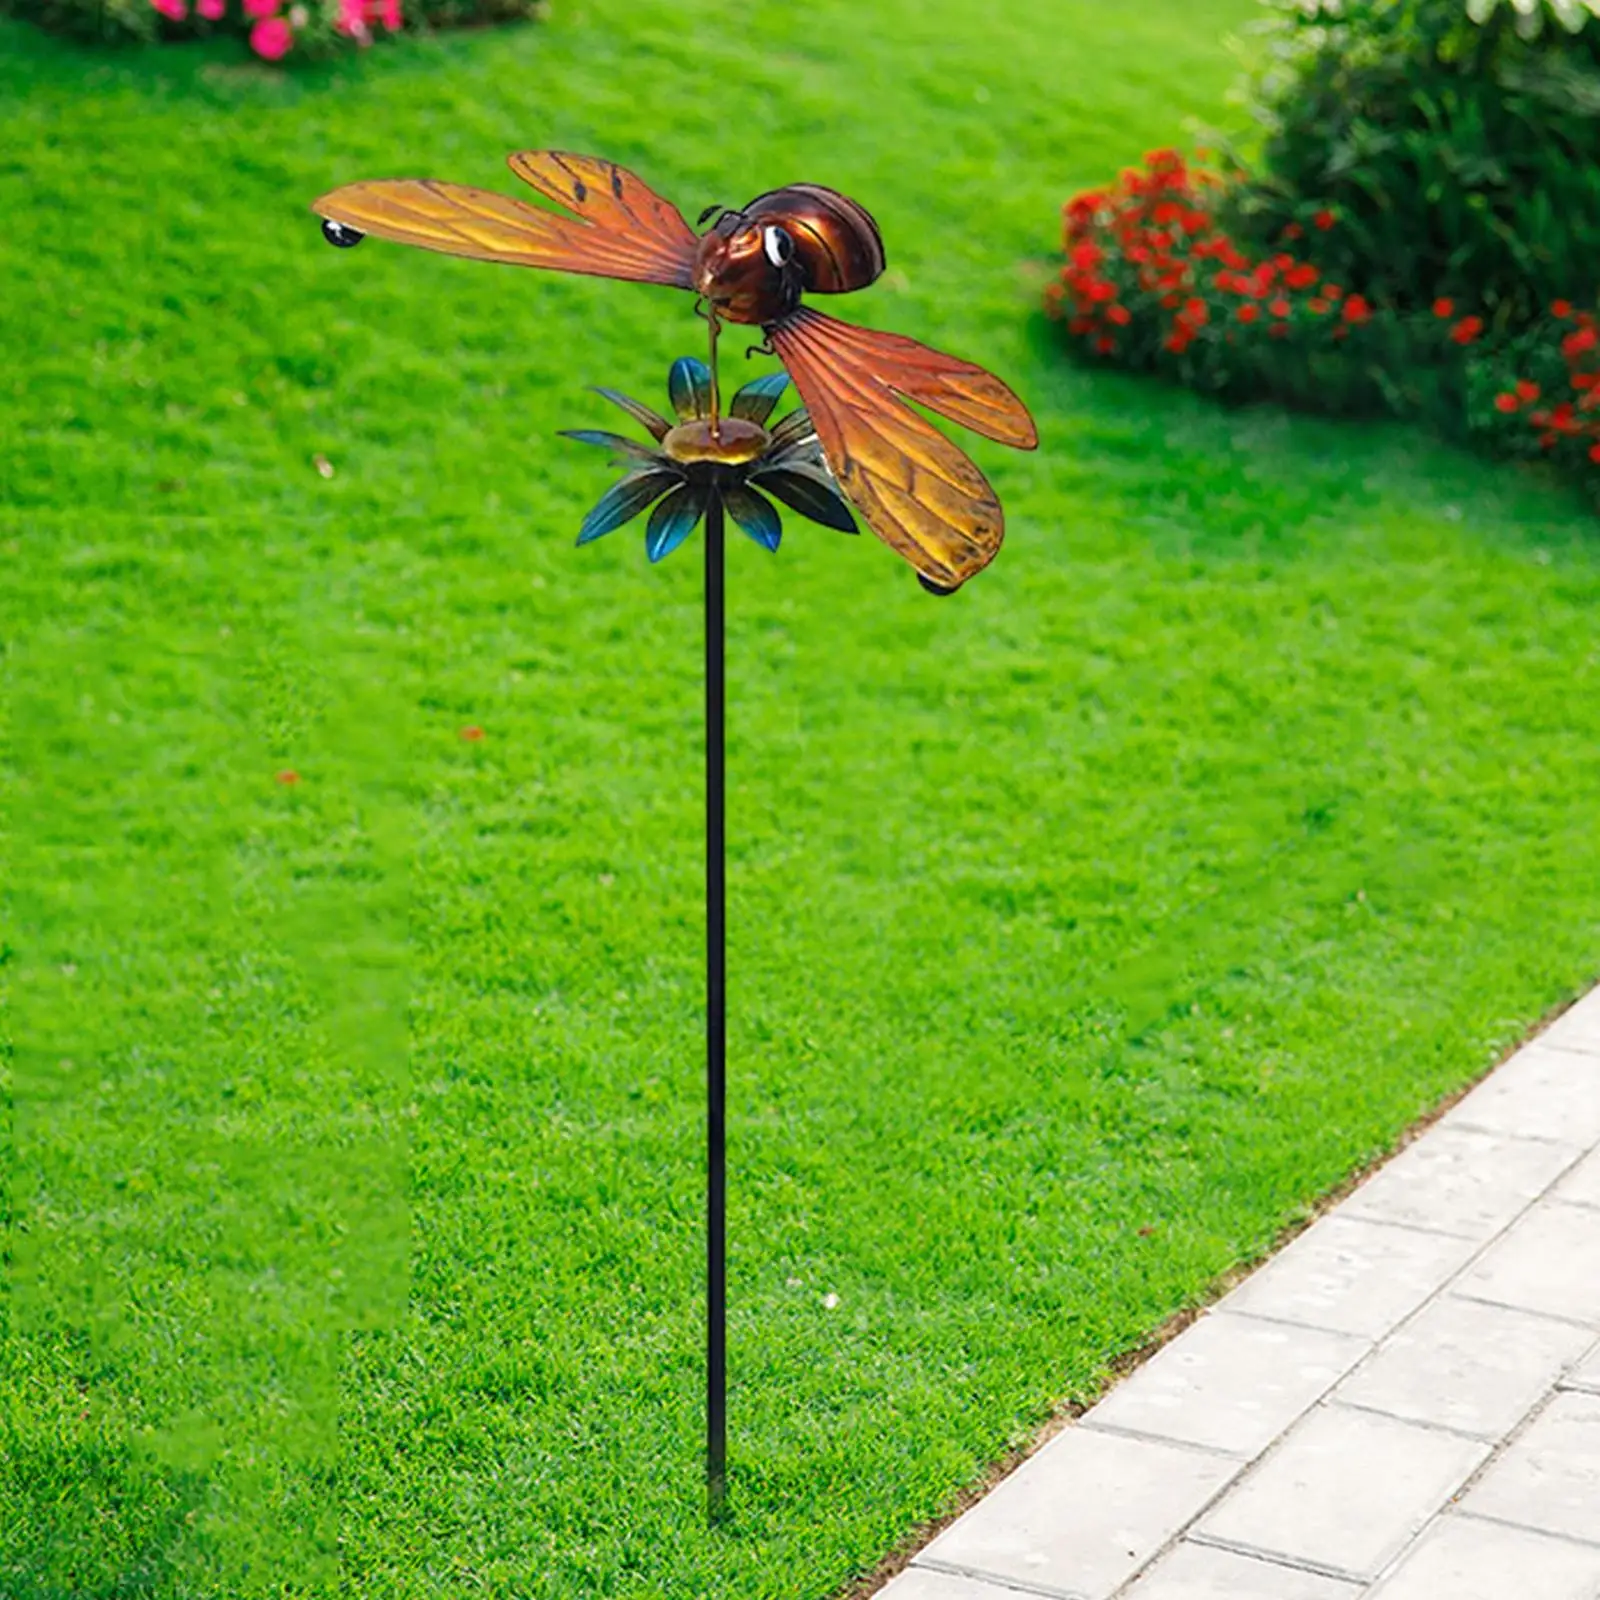 Garden Stakes Decor Sculpture Figurines Yard Ornament Metal Decoration for Patio Outdoor